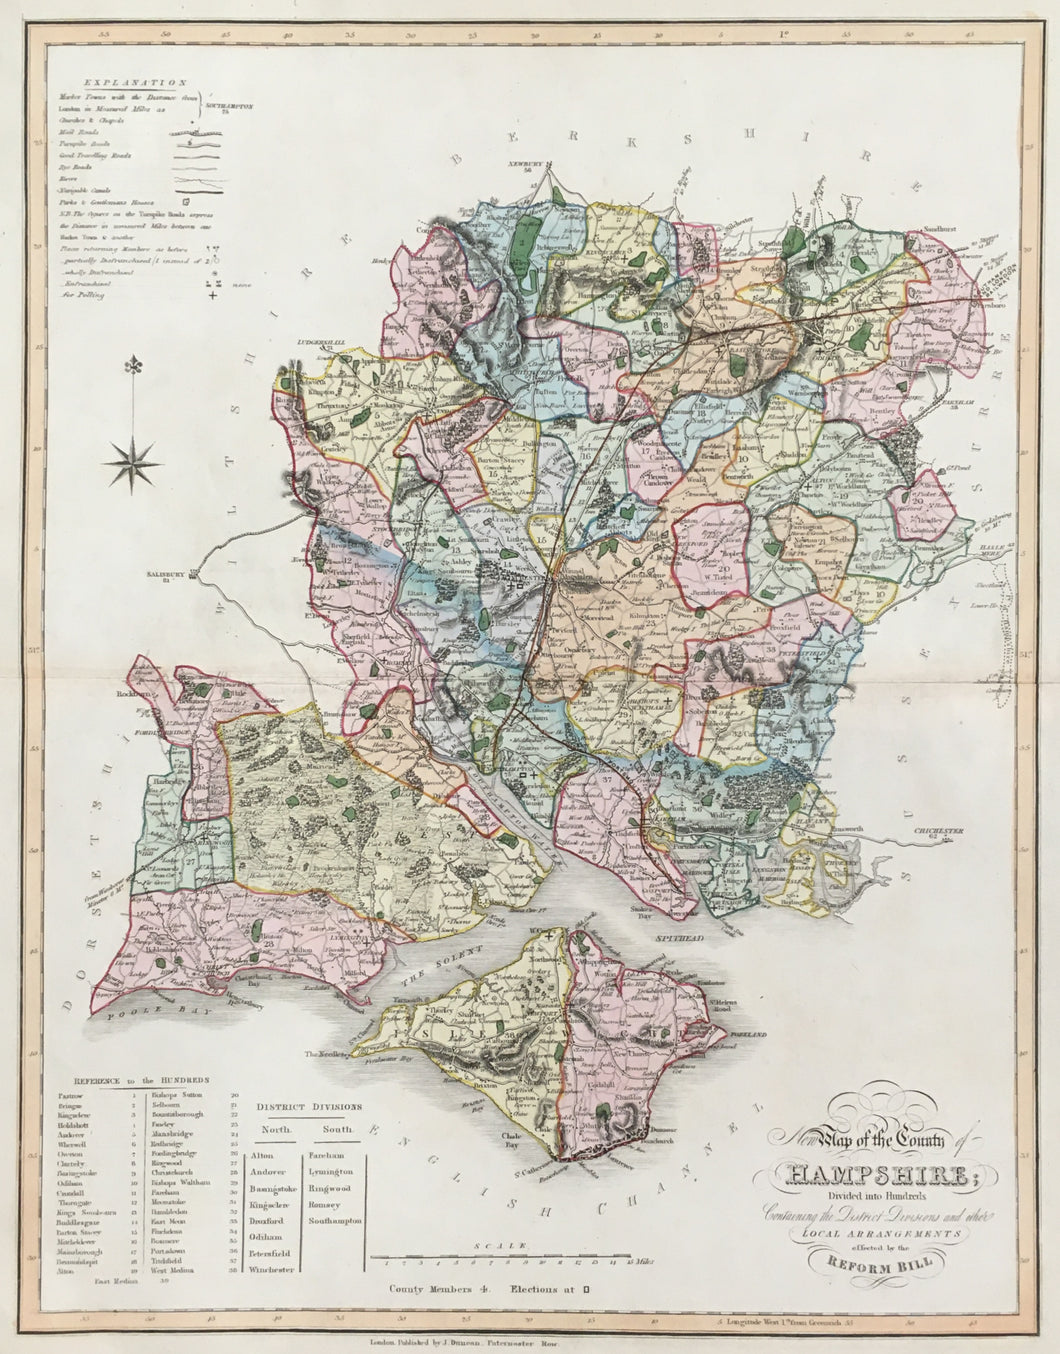 Ebden, William “New Map of the County of Hampshire.”